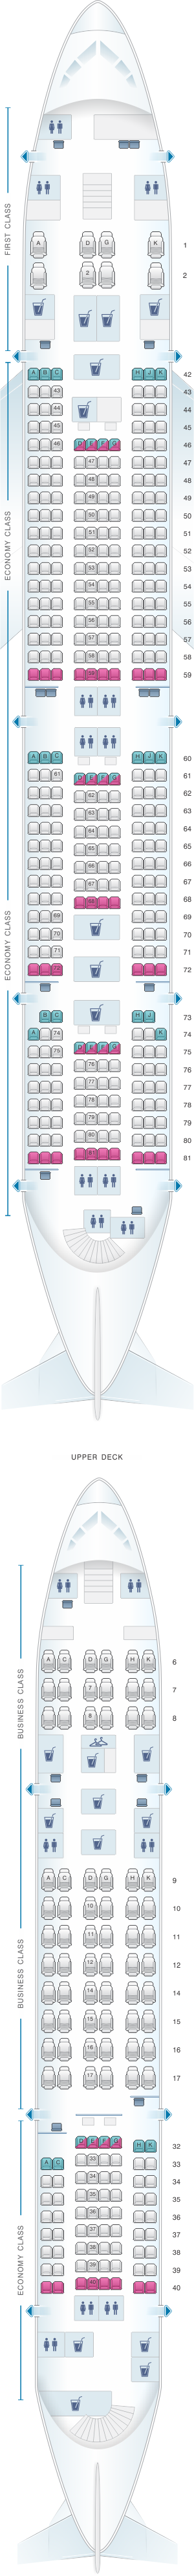 Seat map for Malaysia Airlines Airbus A380 800